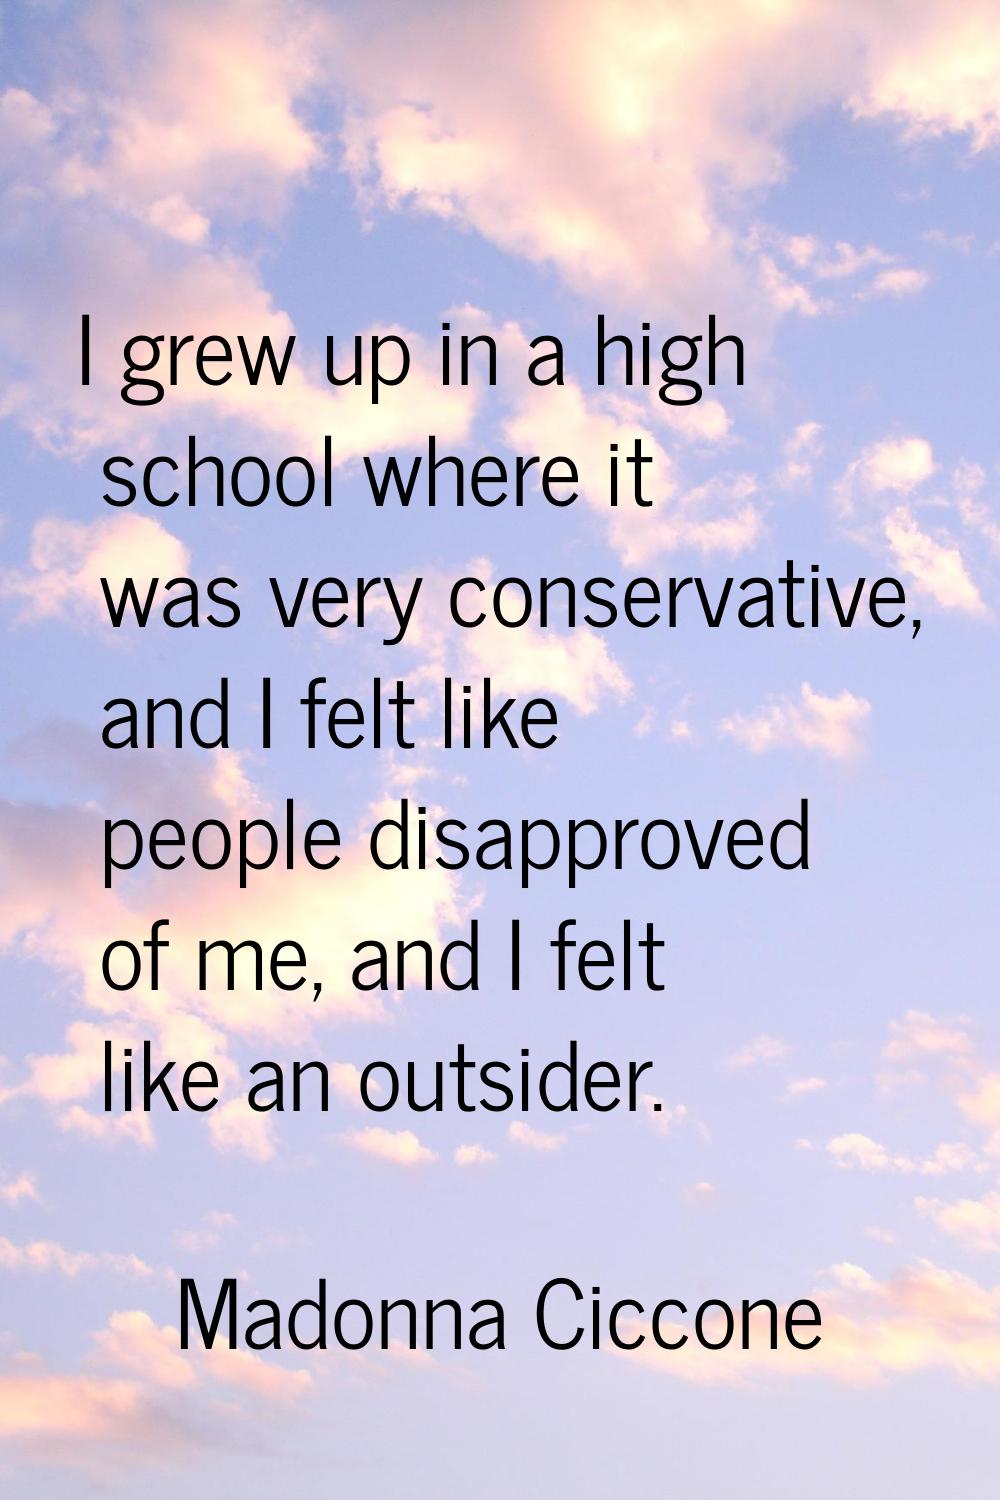 I grew up in a high school where it was very conservative, and I felt like people disapproved of me